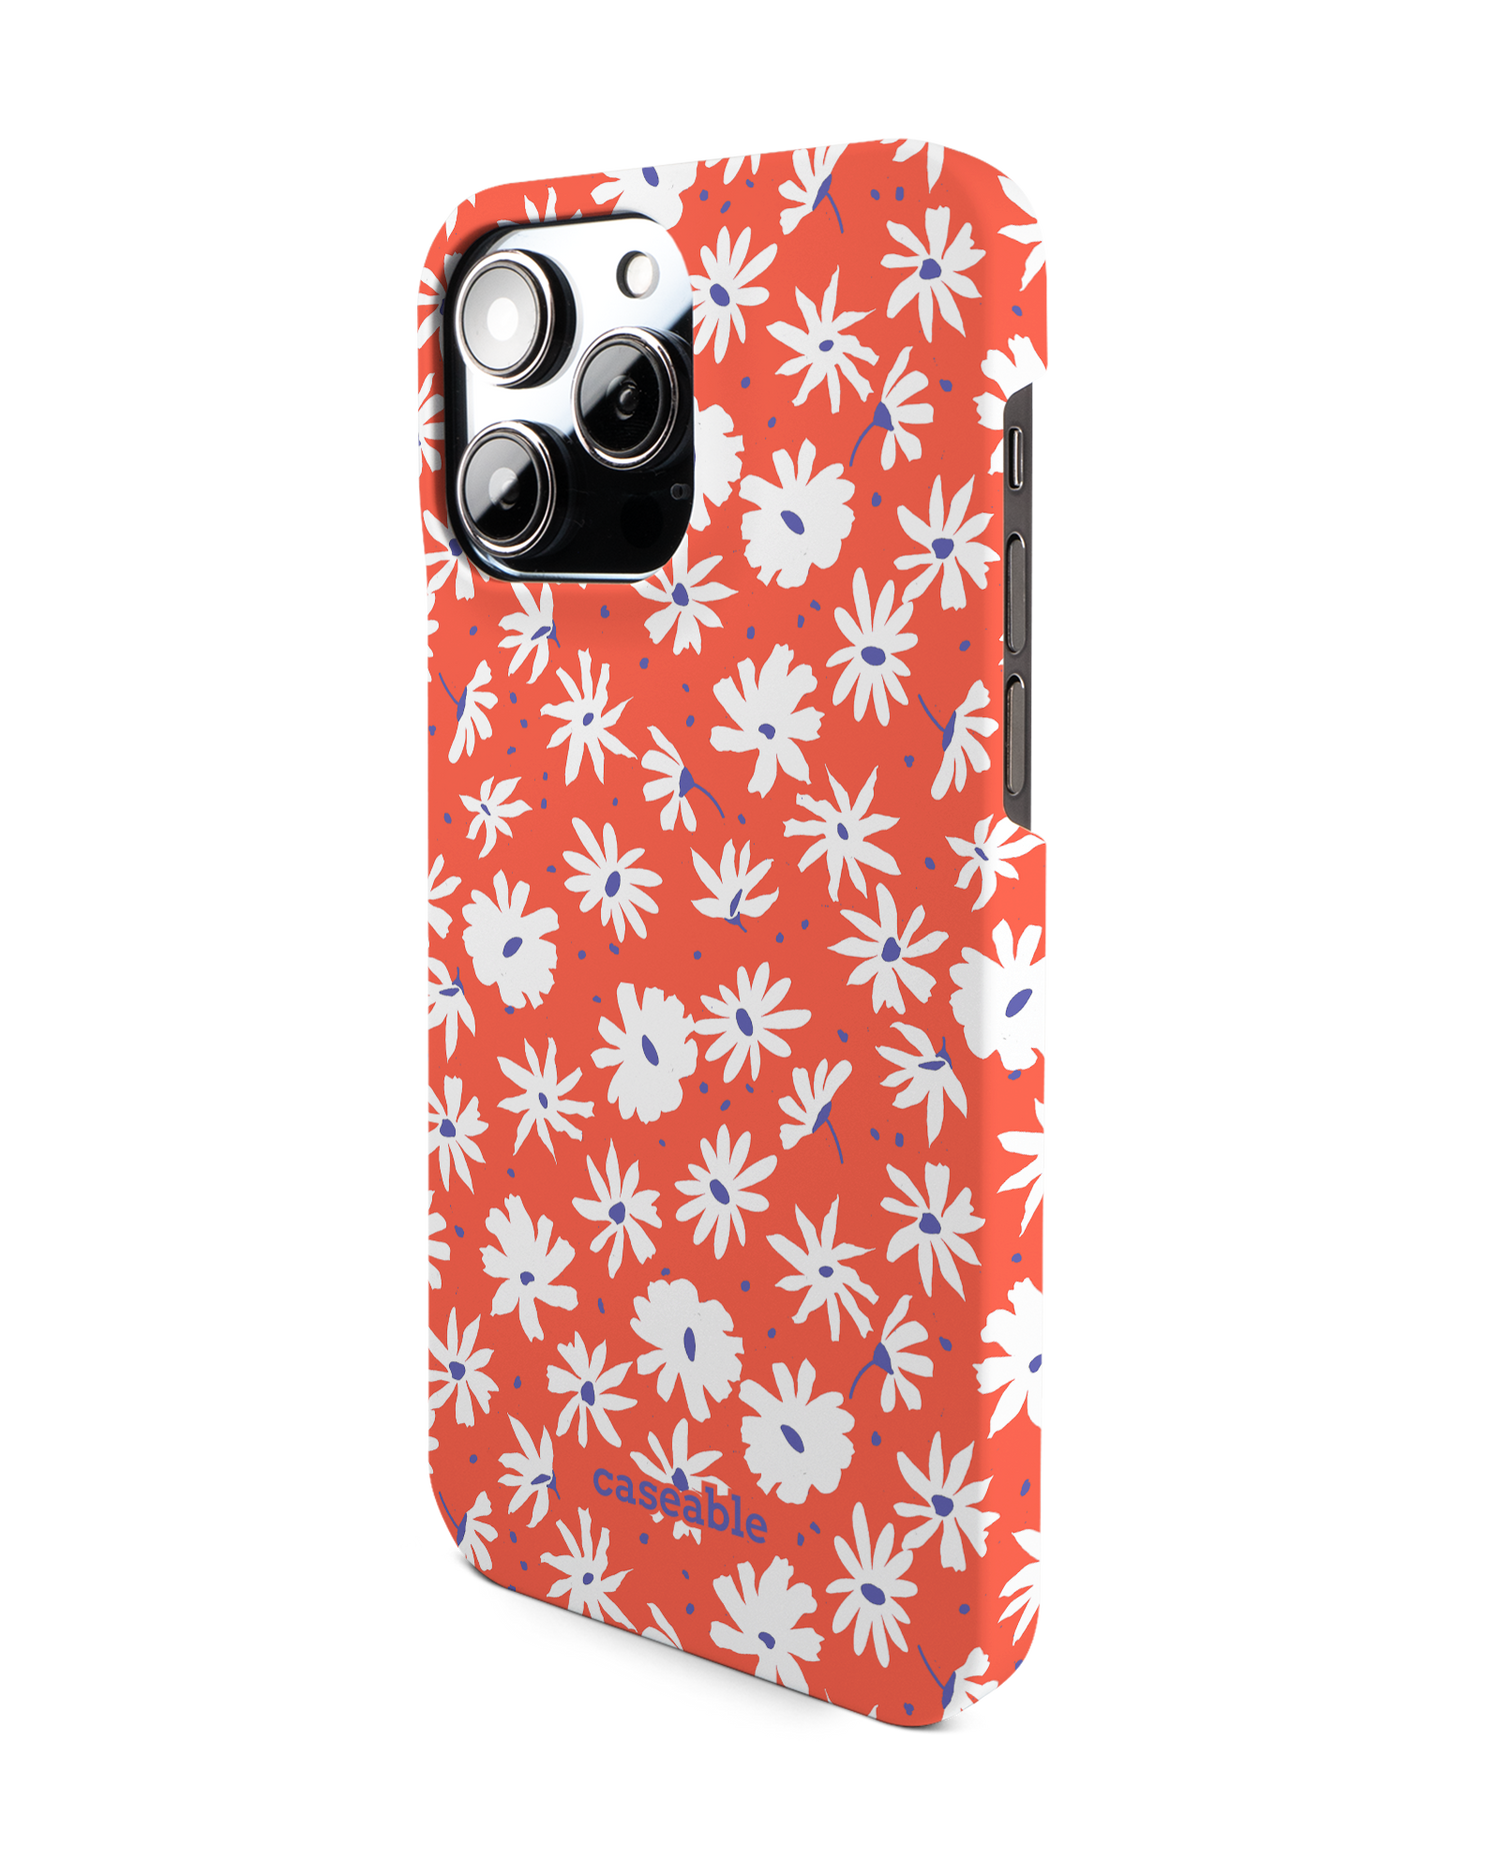 Retro Daisy Hard Shell Phone Case for Apple iPhone 14 Pro Max: View from the right side